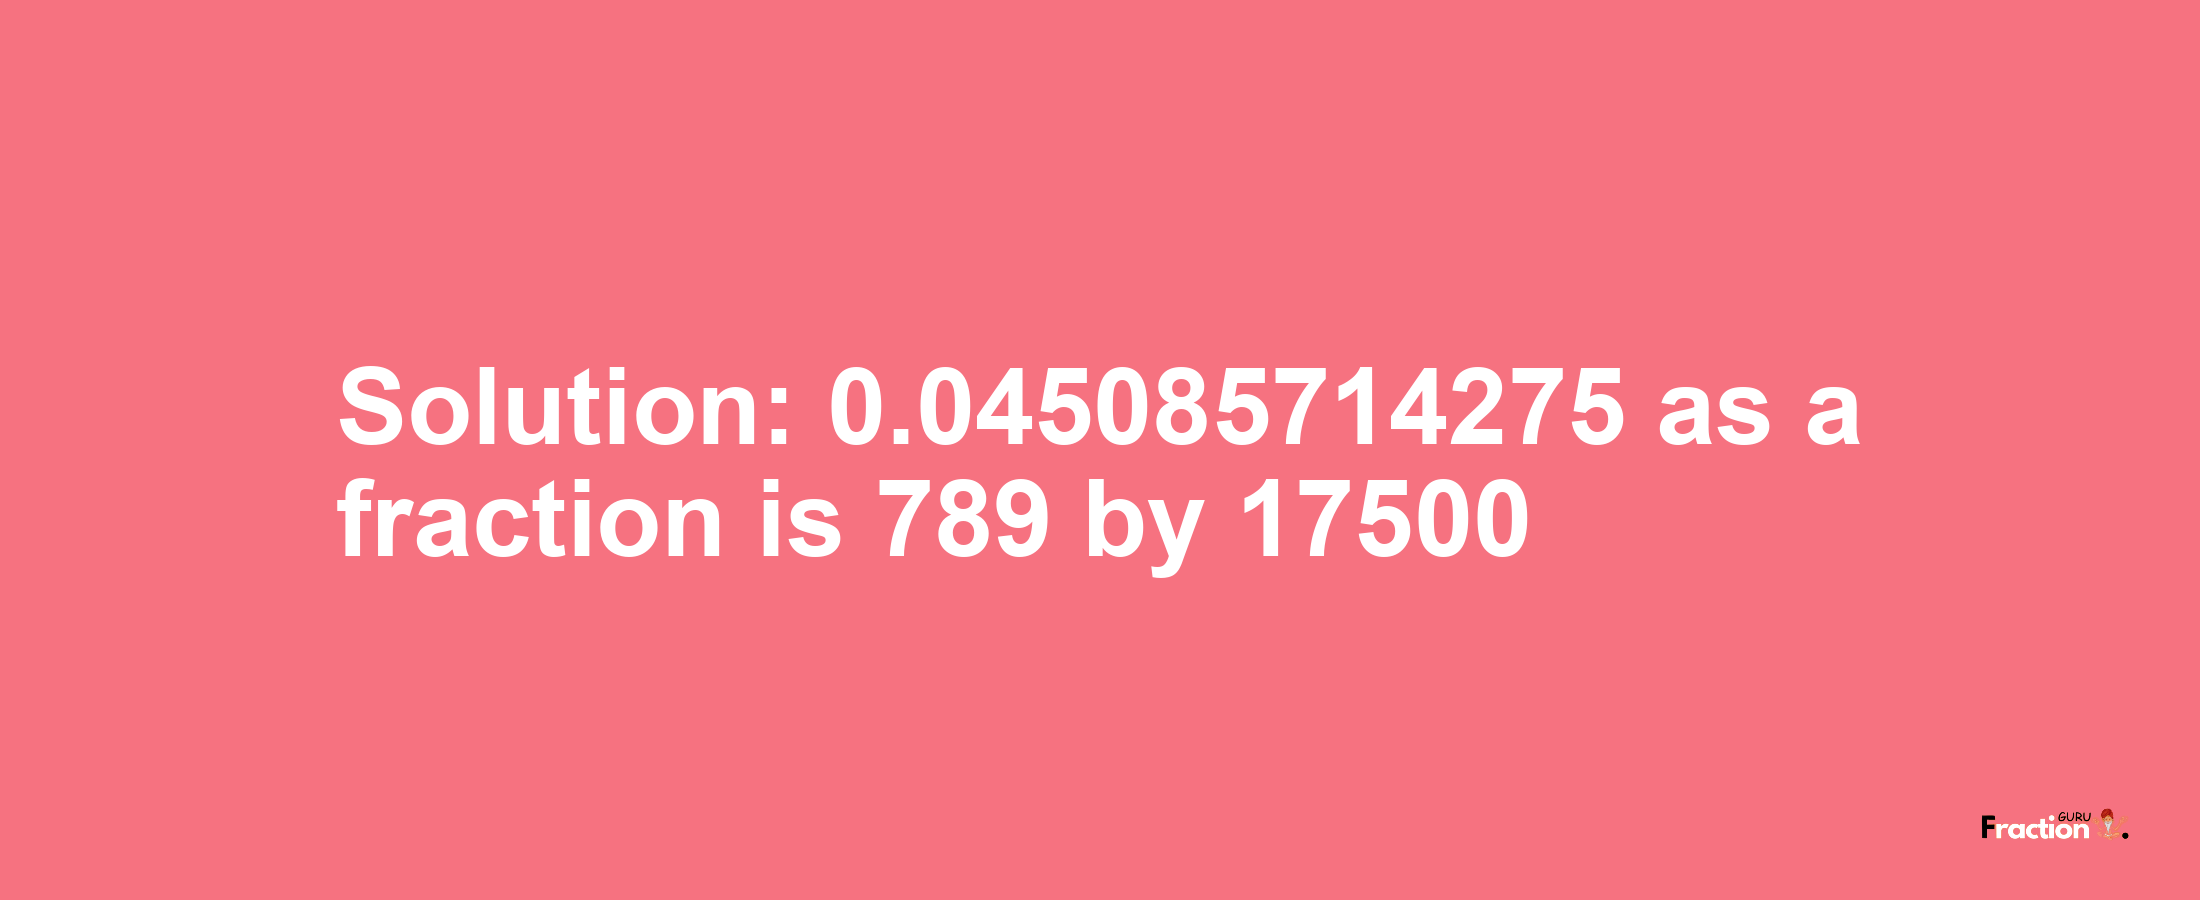 Solution:0.045085714275 as a fraction is 789/17500